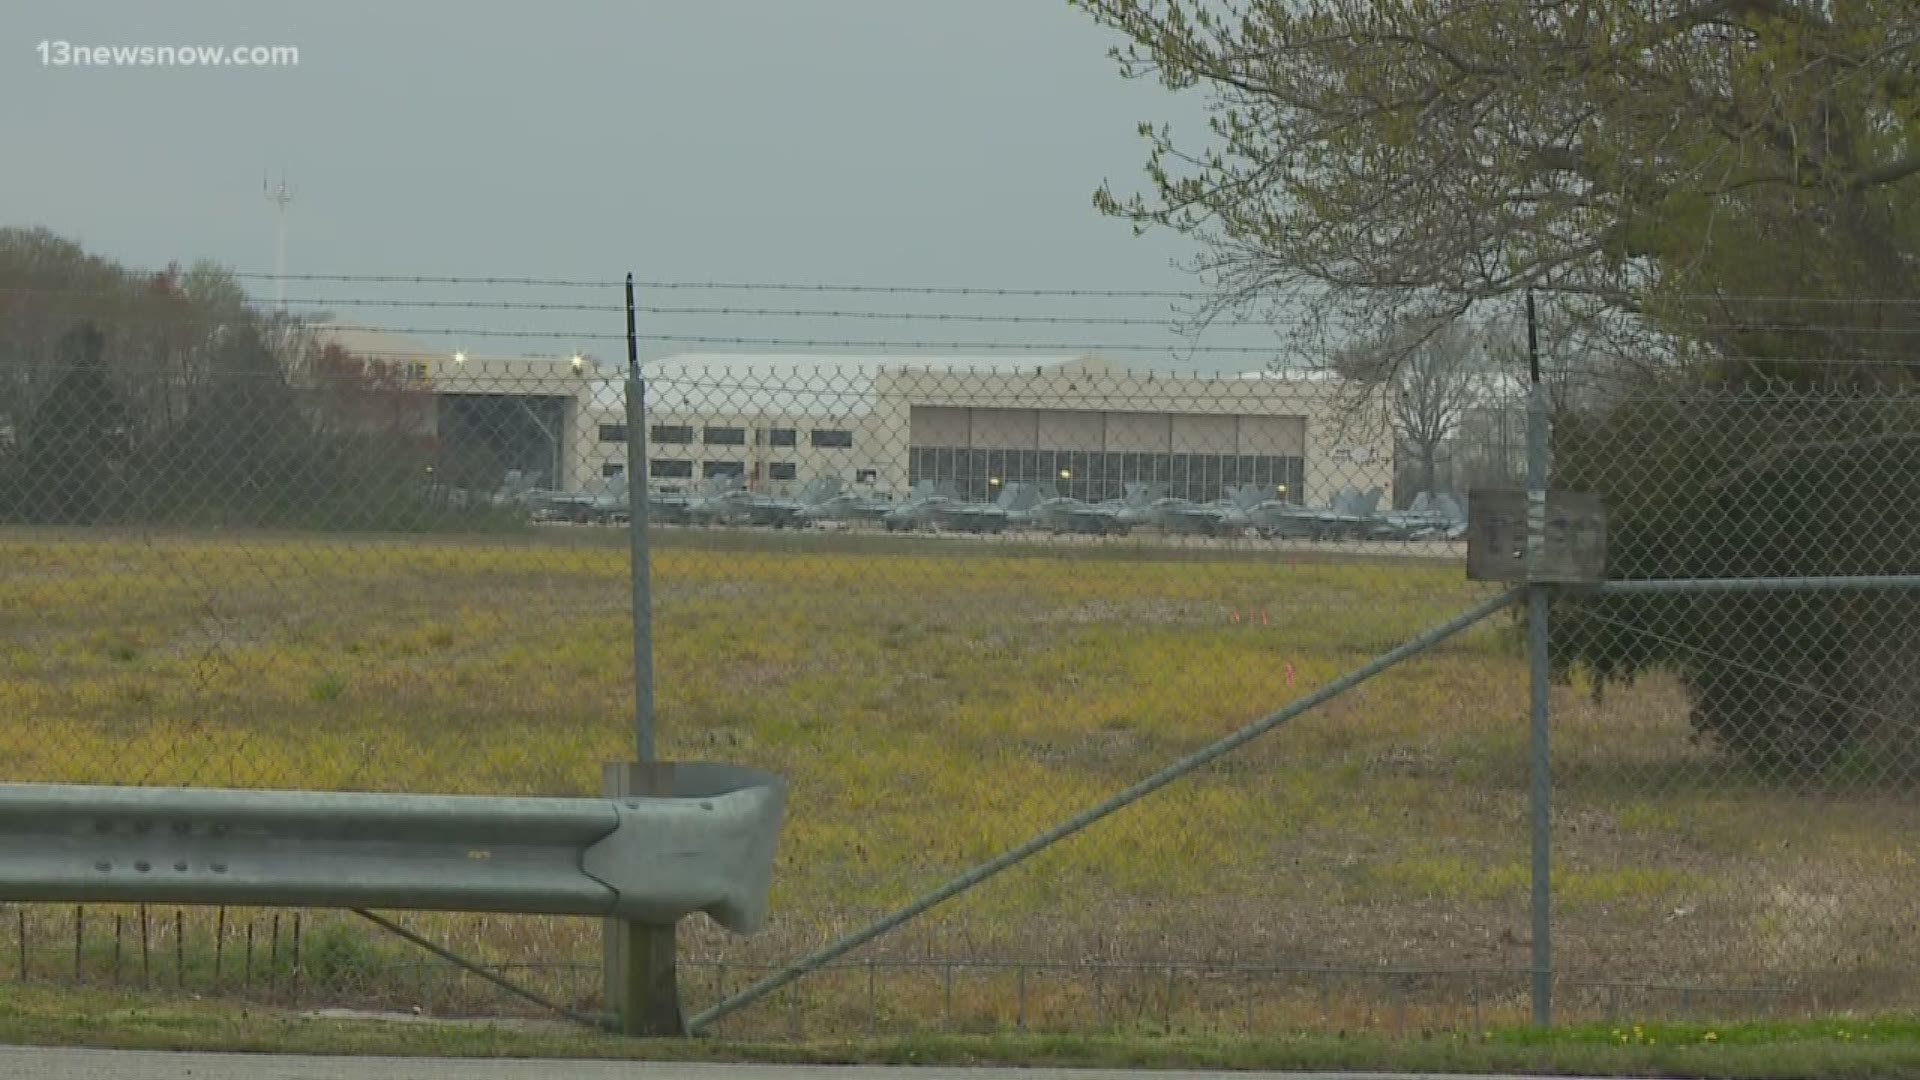 Around 6:45 Friday morning there was a shooting at NAS Oceana. The victim was taken to the hospital and the shooter is dead.